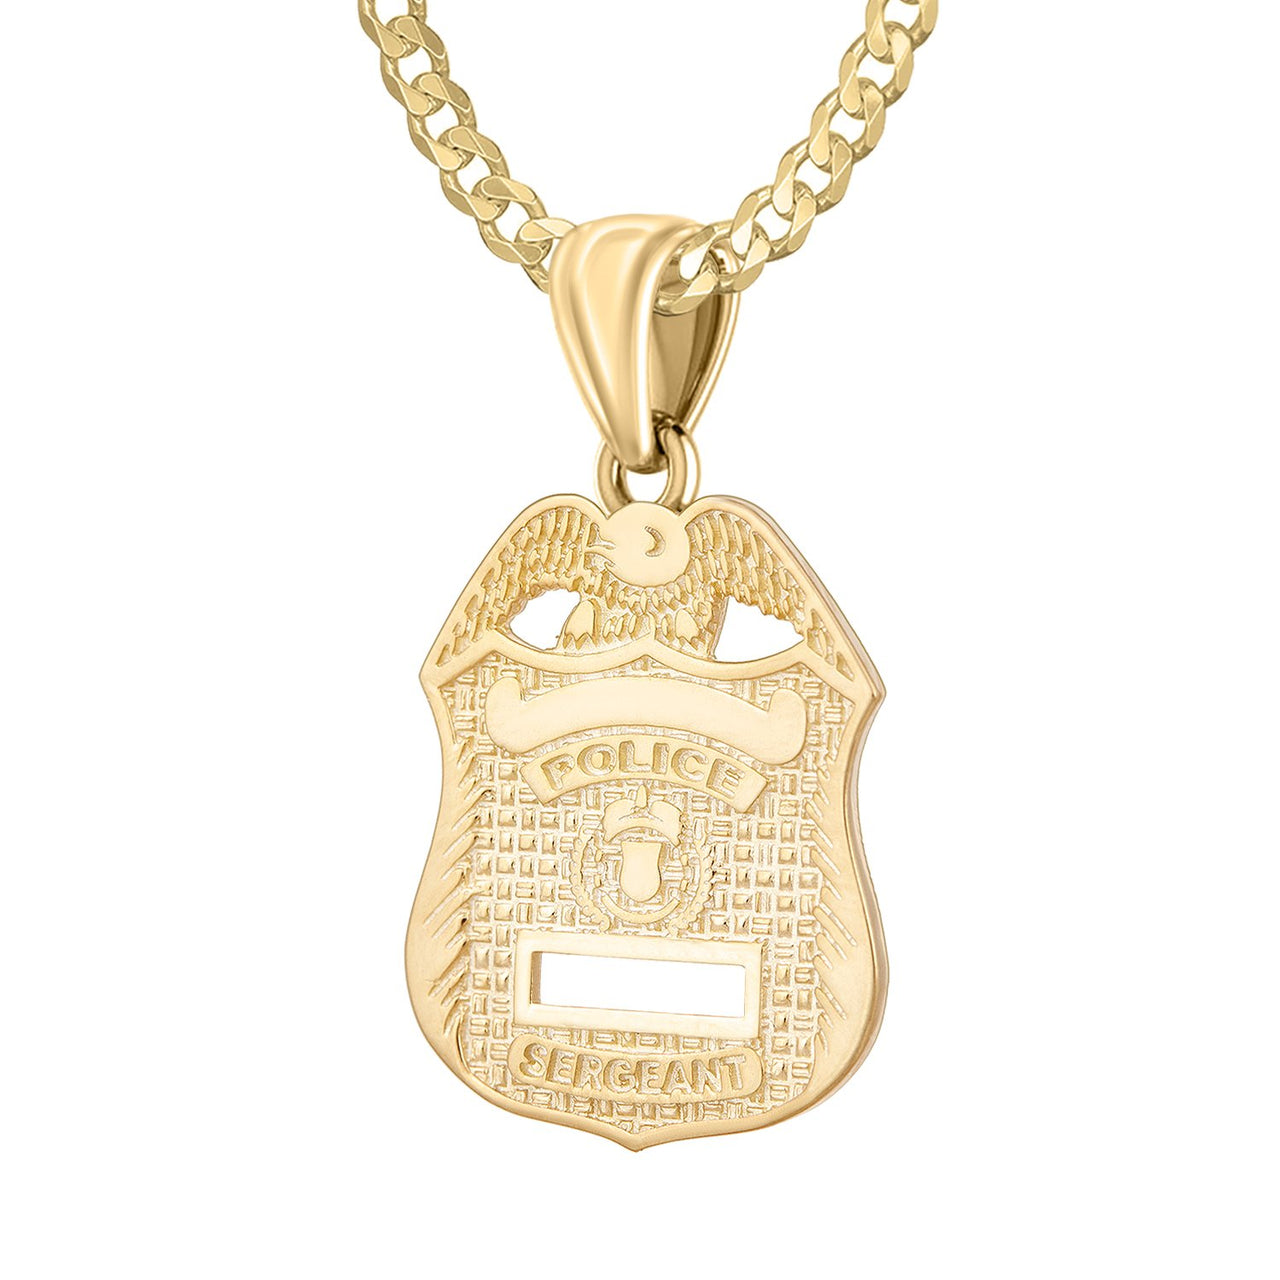 Police Badge Necklace In Gold For Men - 2.6mm Curb Chain